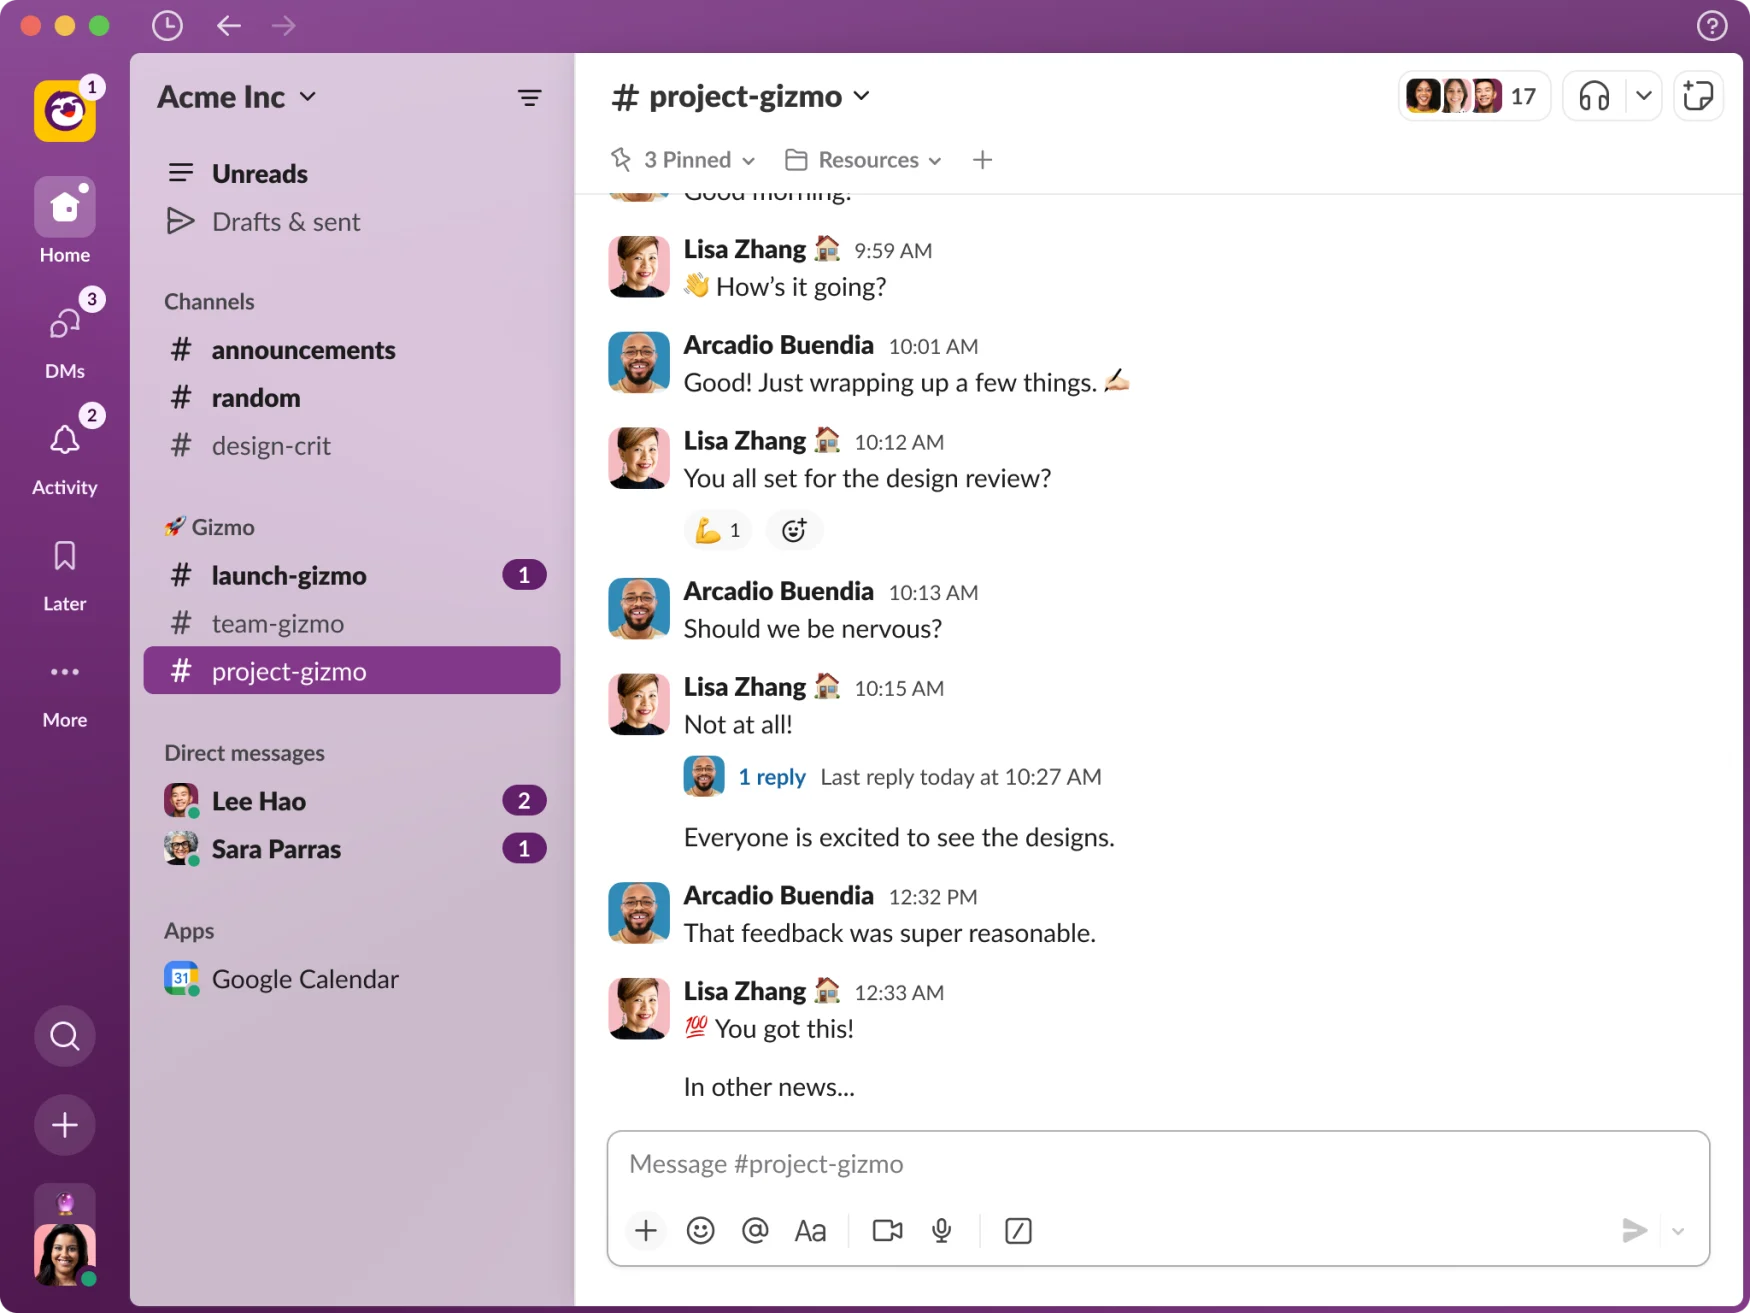 Slack screenshot showing the new redesign, featuring an updated left sidebar with Home, DMs, Activity, Later and More buttons.